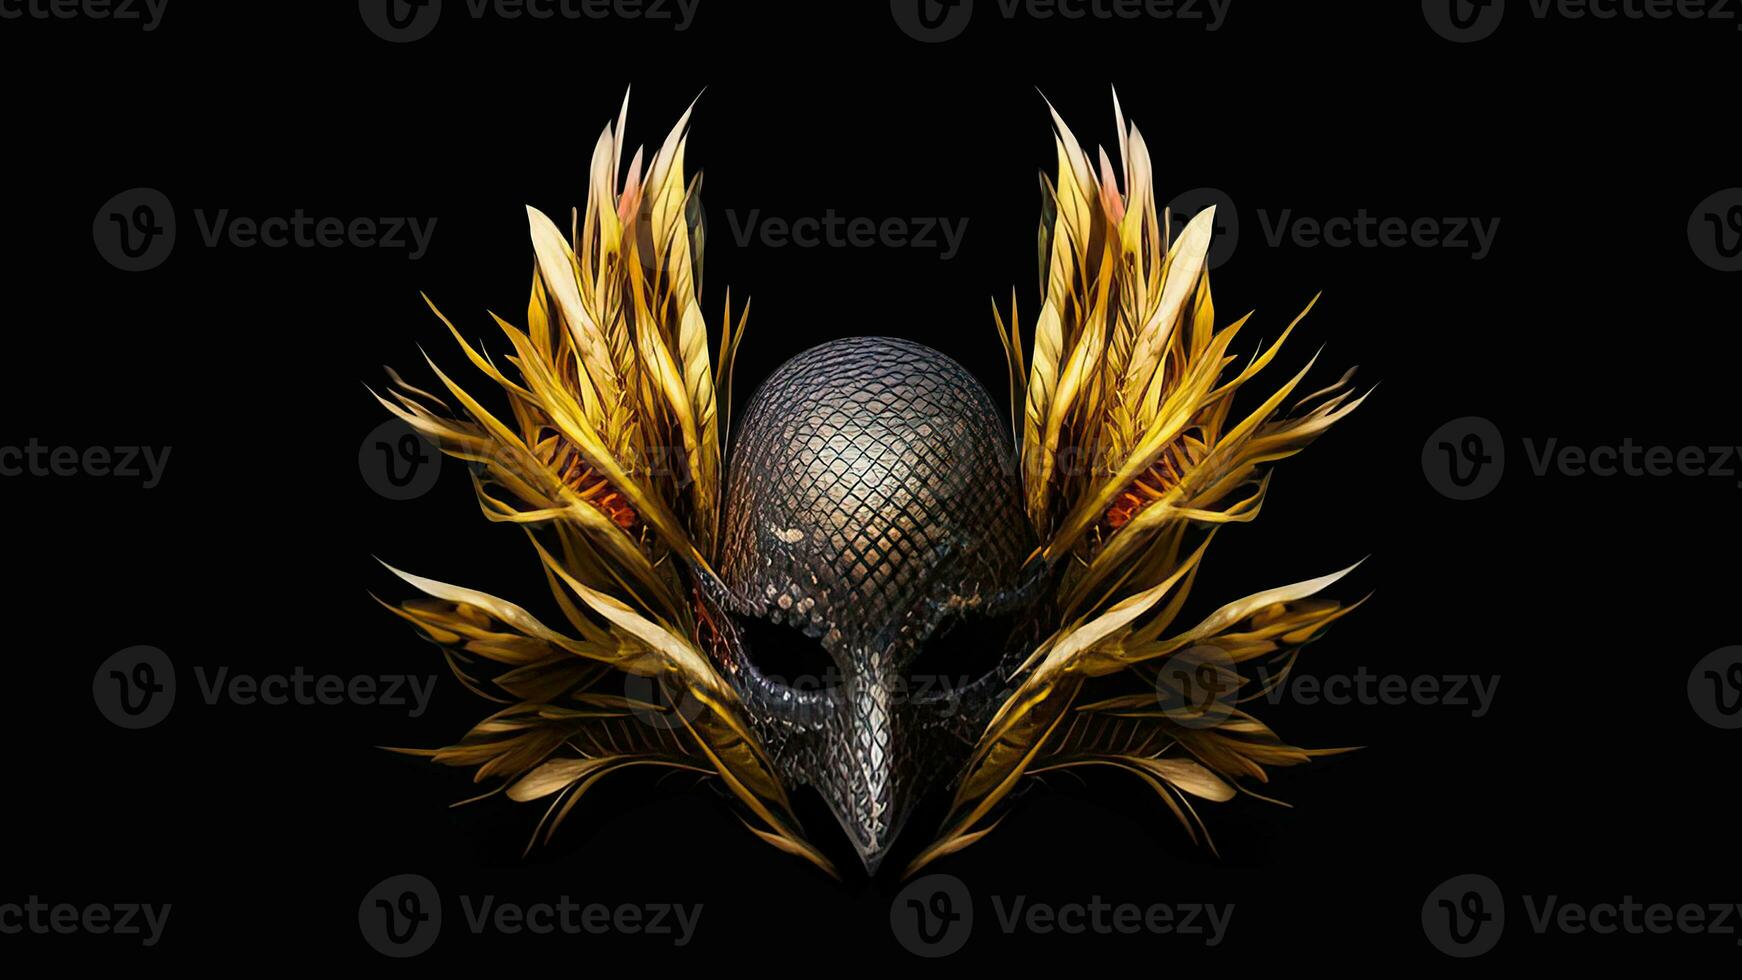 3D Render of Venetian Mask With Golden Feathers On Black Background. Carnival Concept. photo